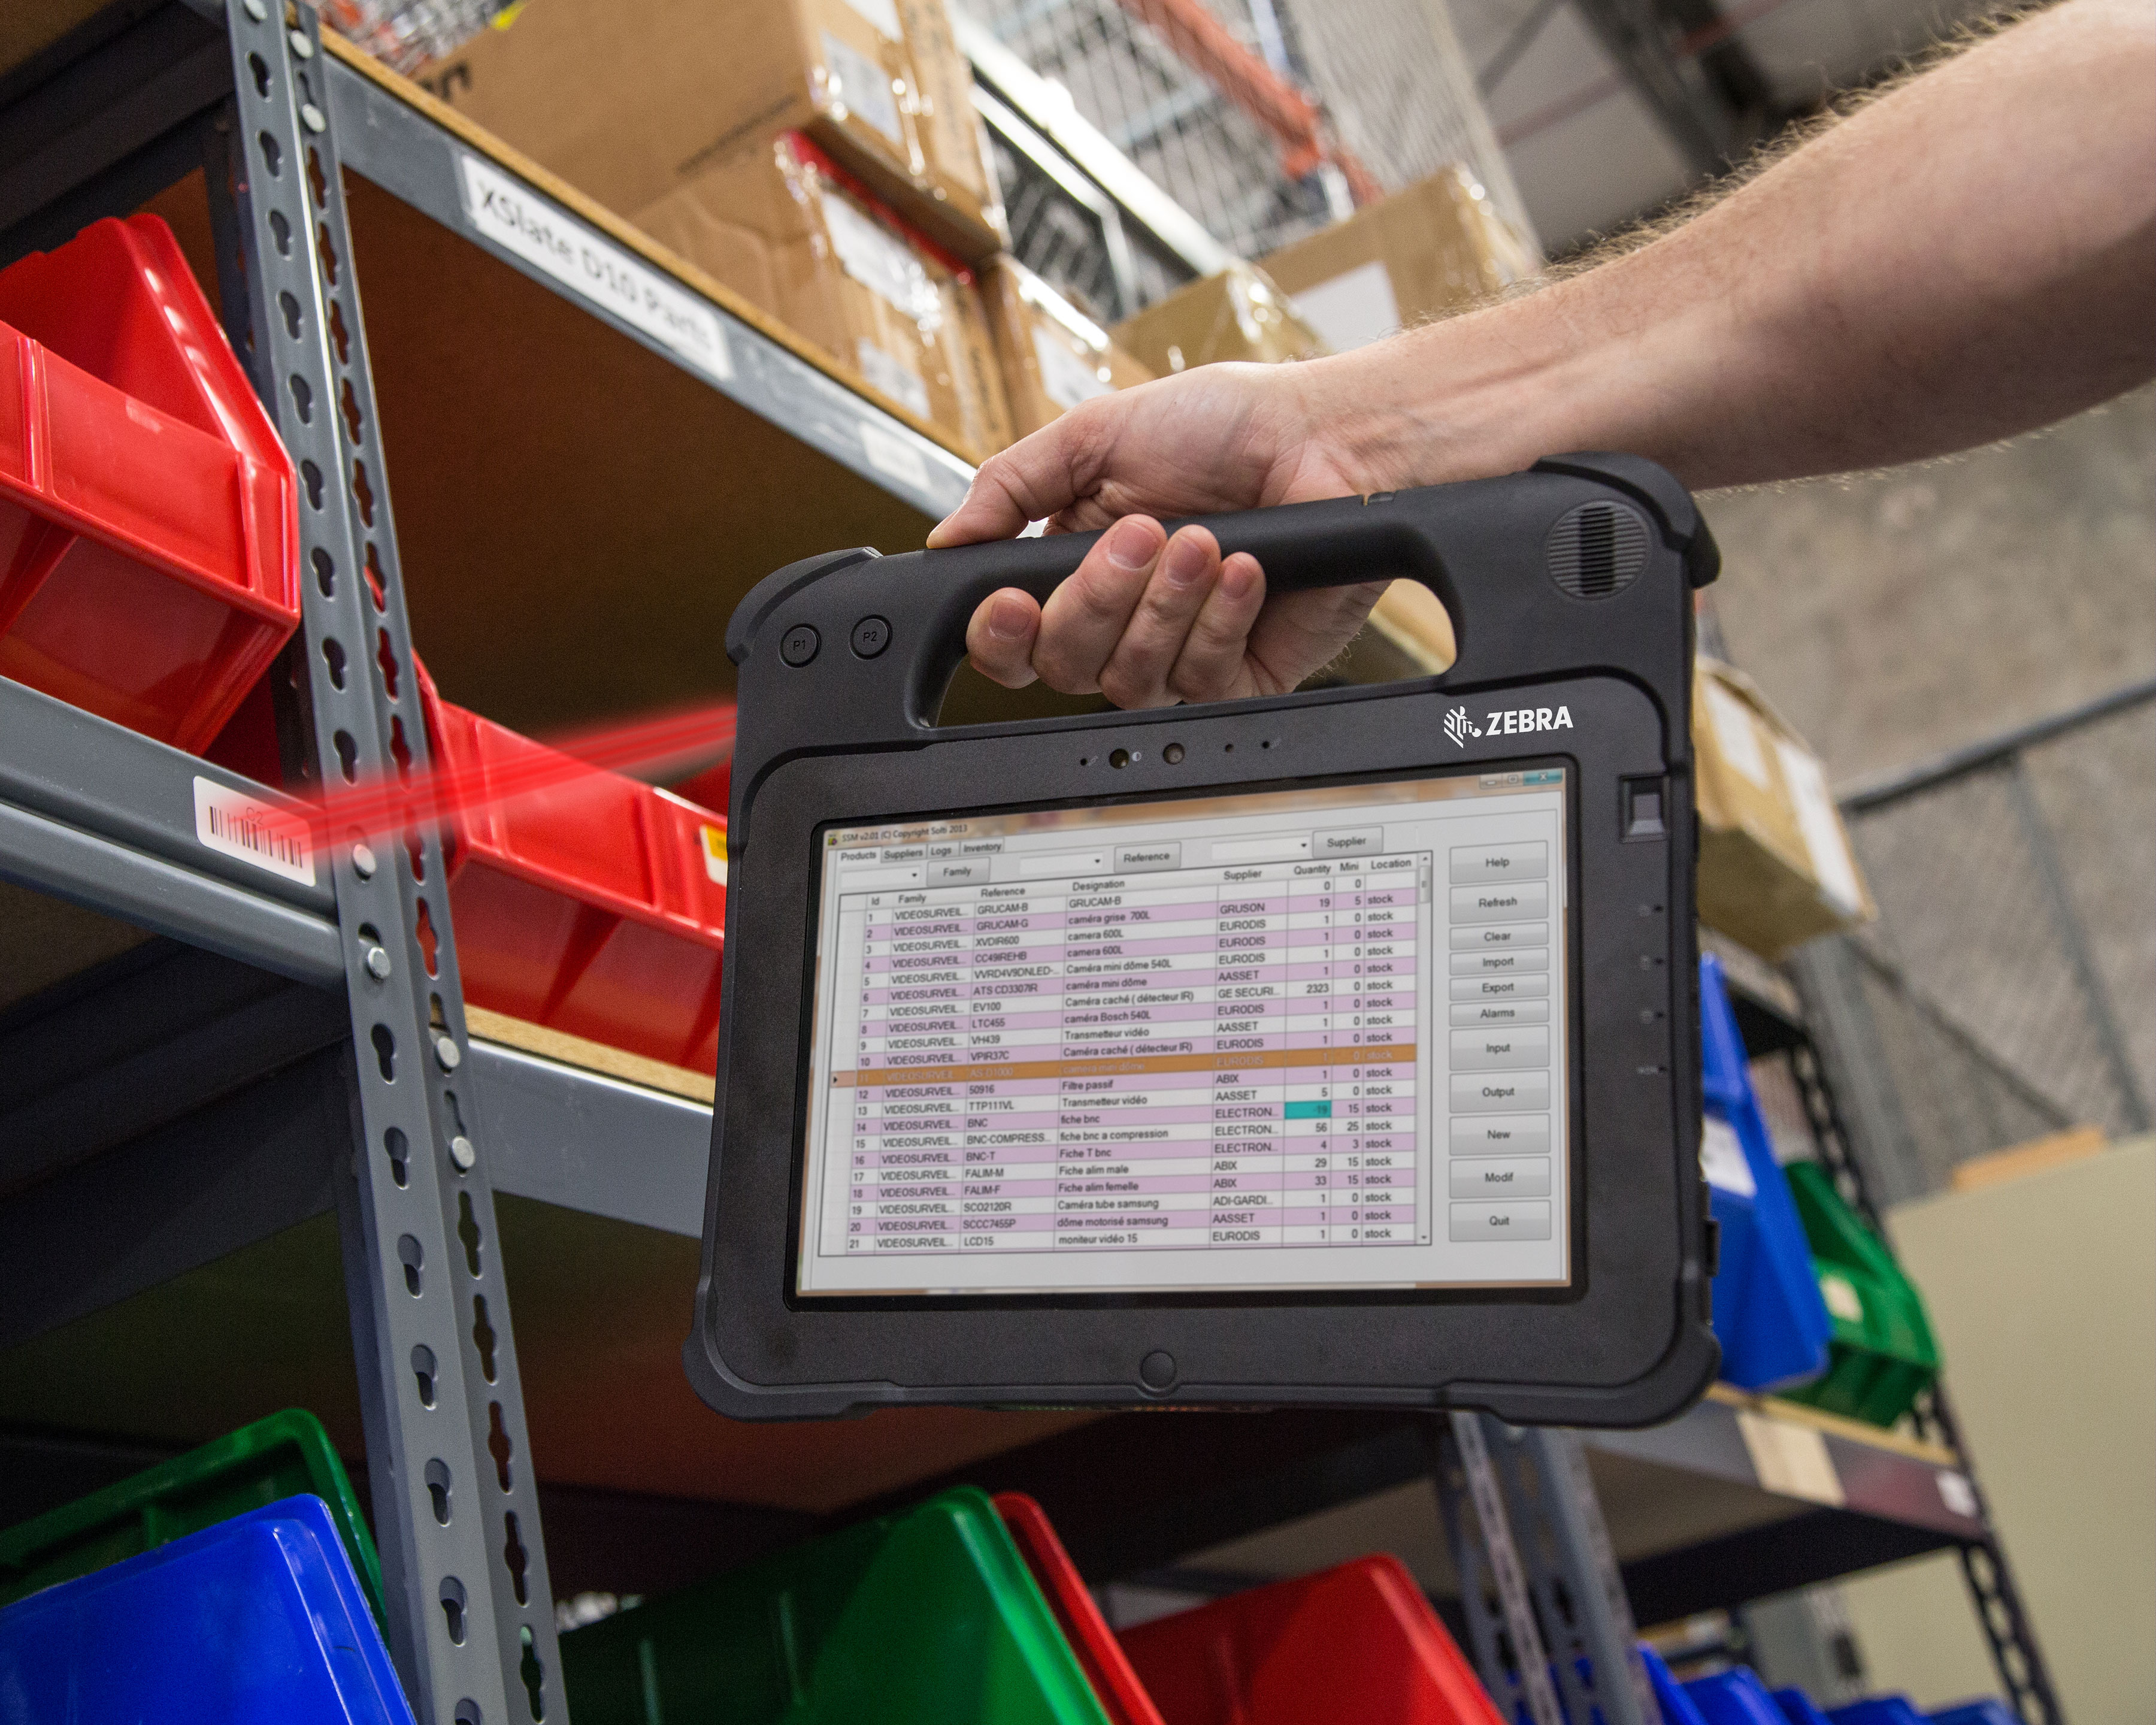 Zebra L10 rugged tablet scans a warehouse barcode